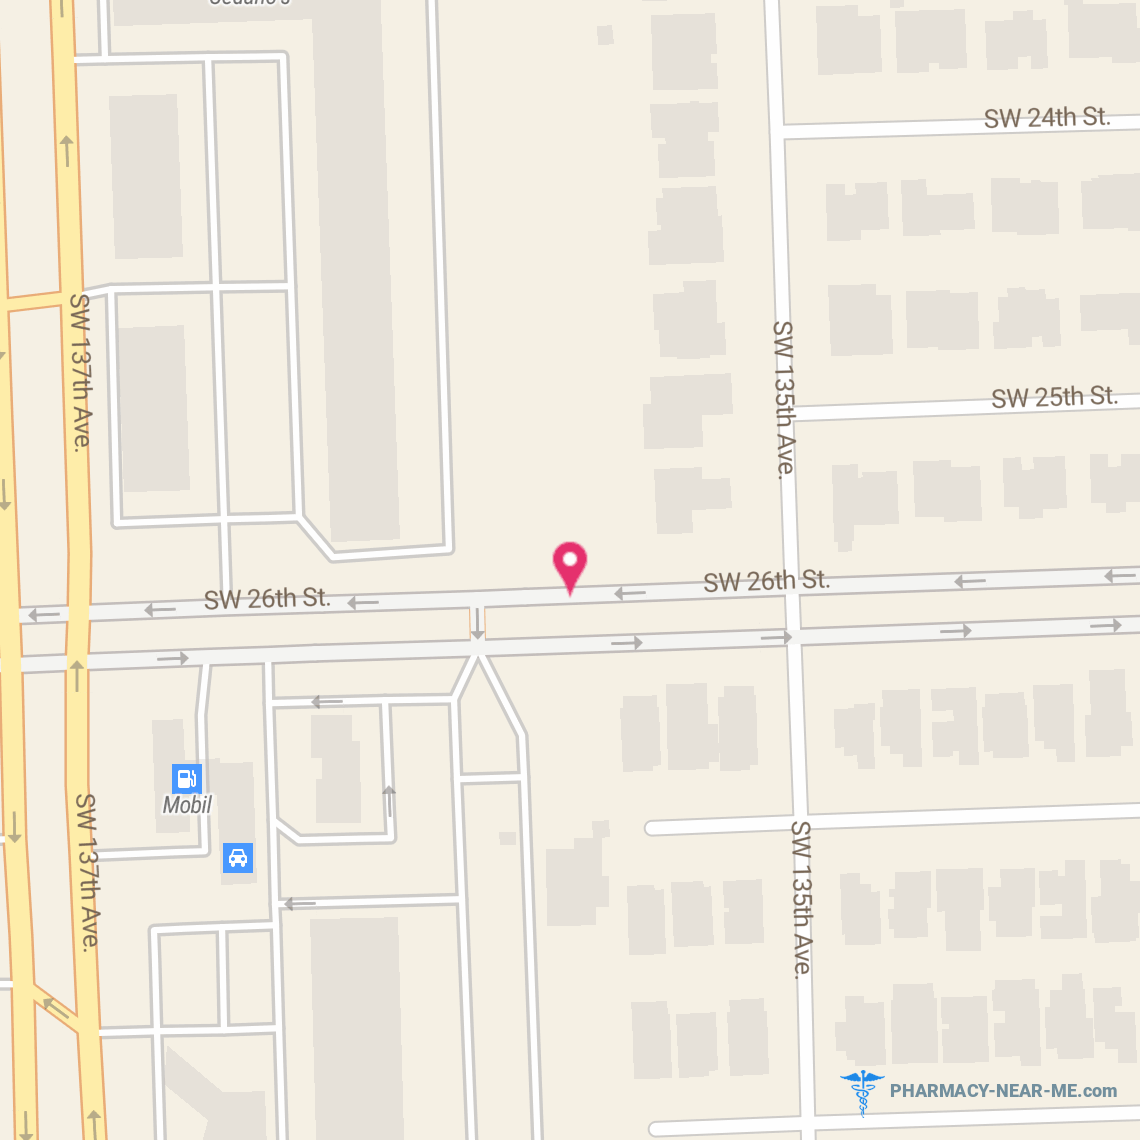 RIVERO PHARMACY INC - Pharmacy Hours, Phone, Reviews & Information: 13621 SW 26th St, Tamiami, Florida 33175, United States